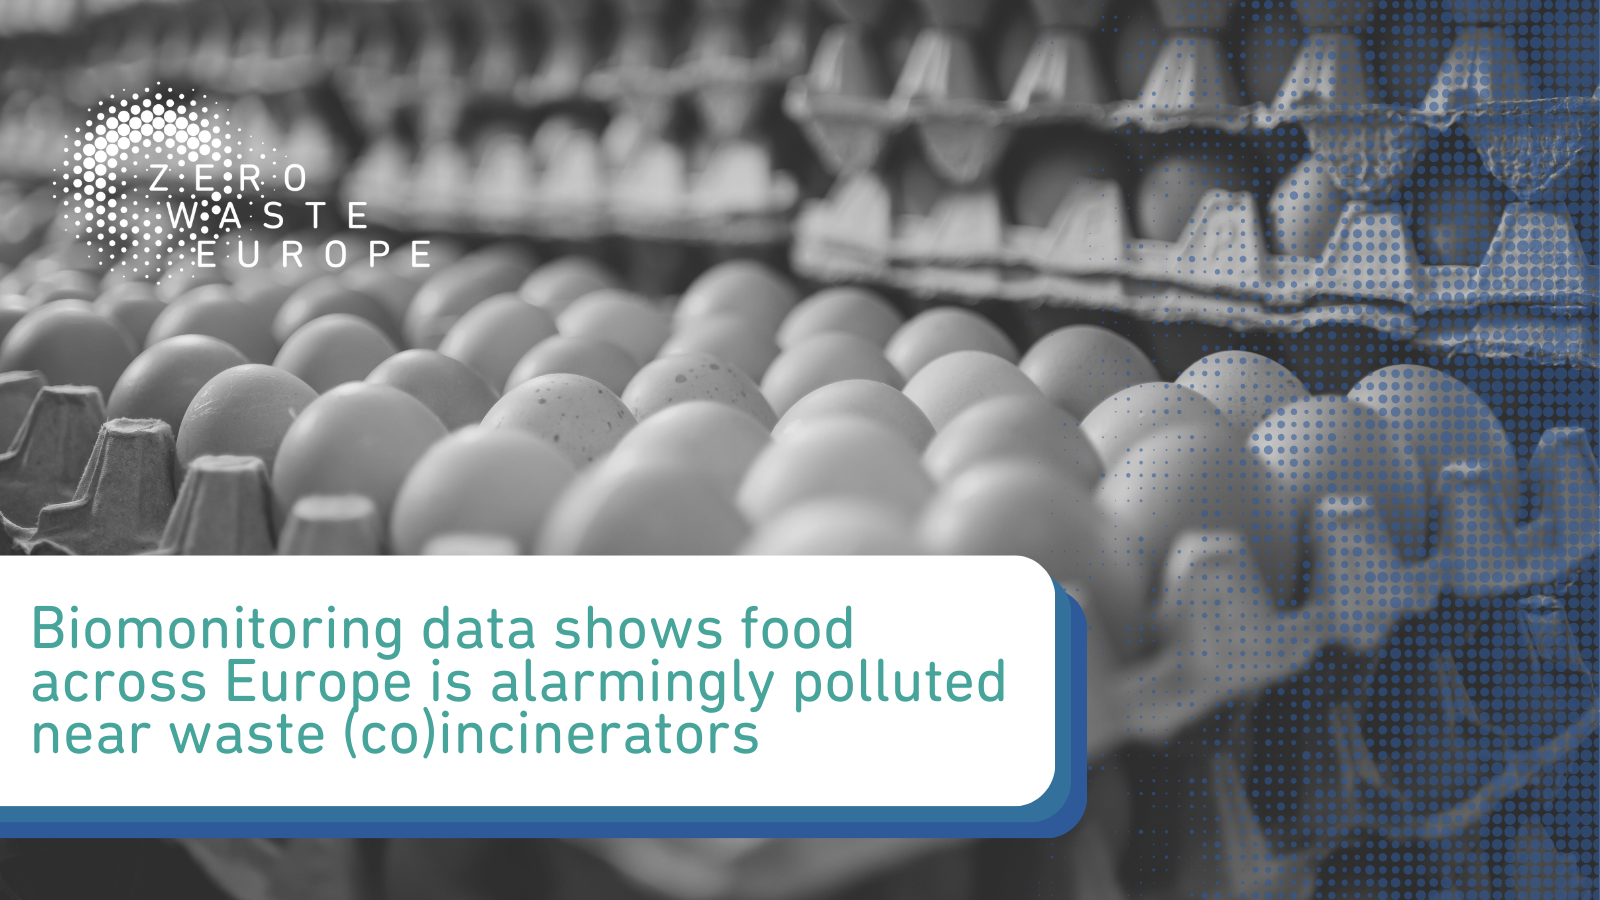 Biomonitoring data shows food across Europe is alarmingly polluted near waste (co)incinerators